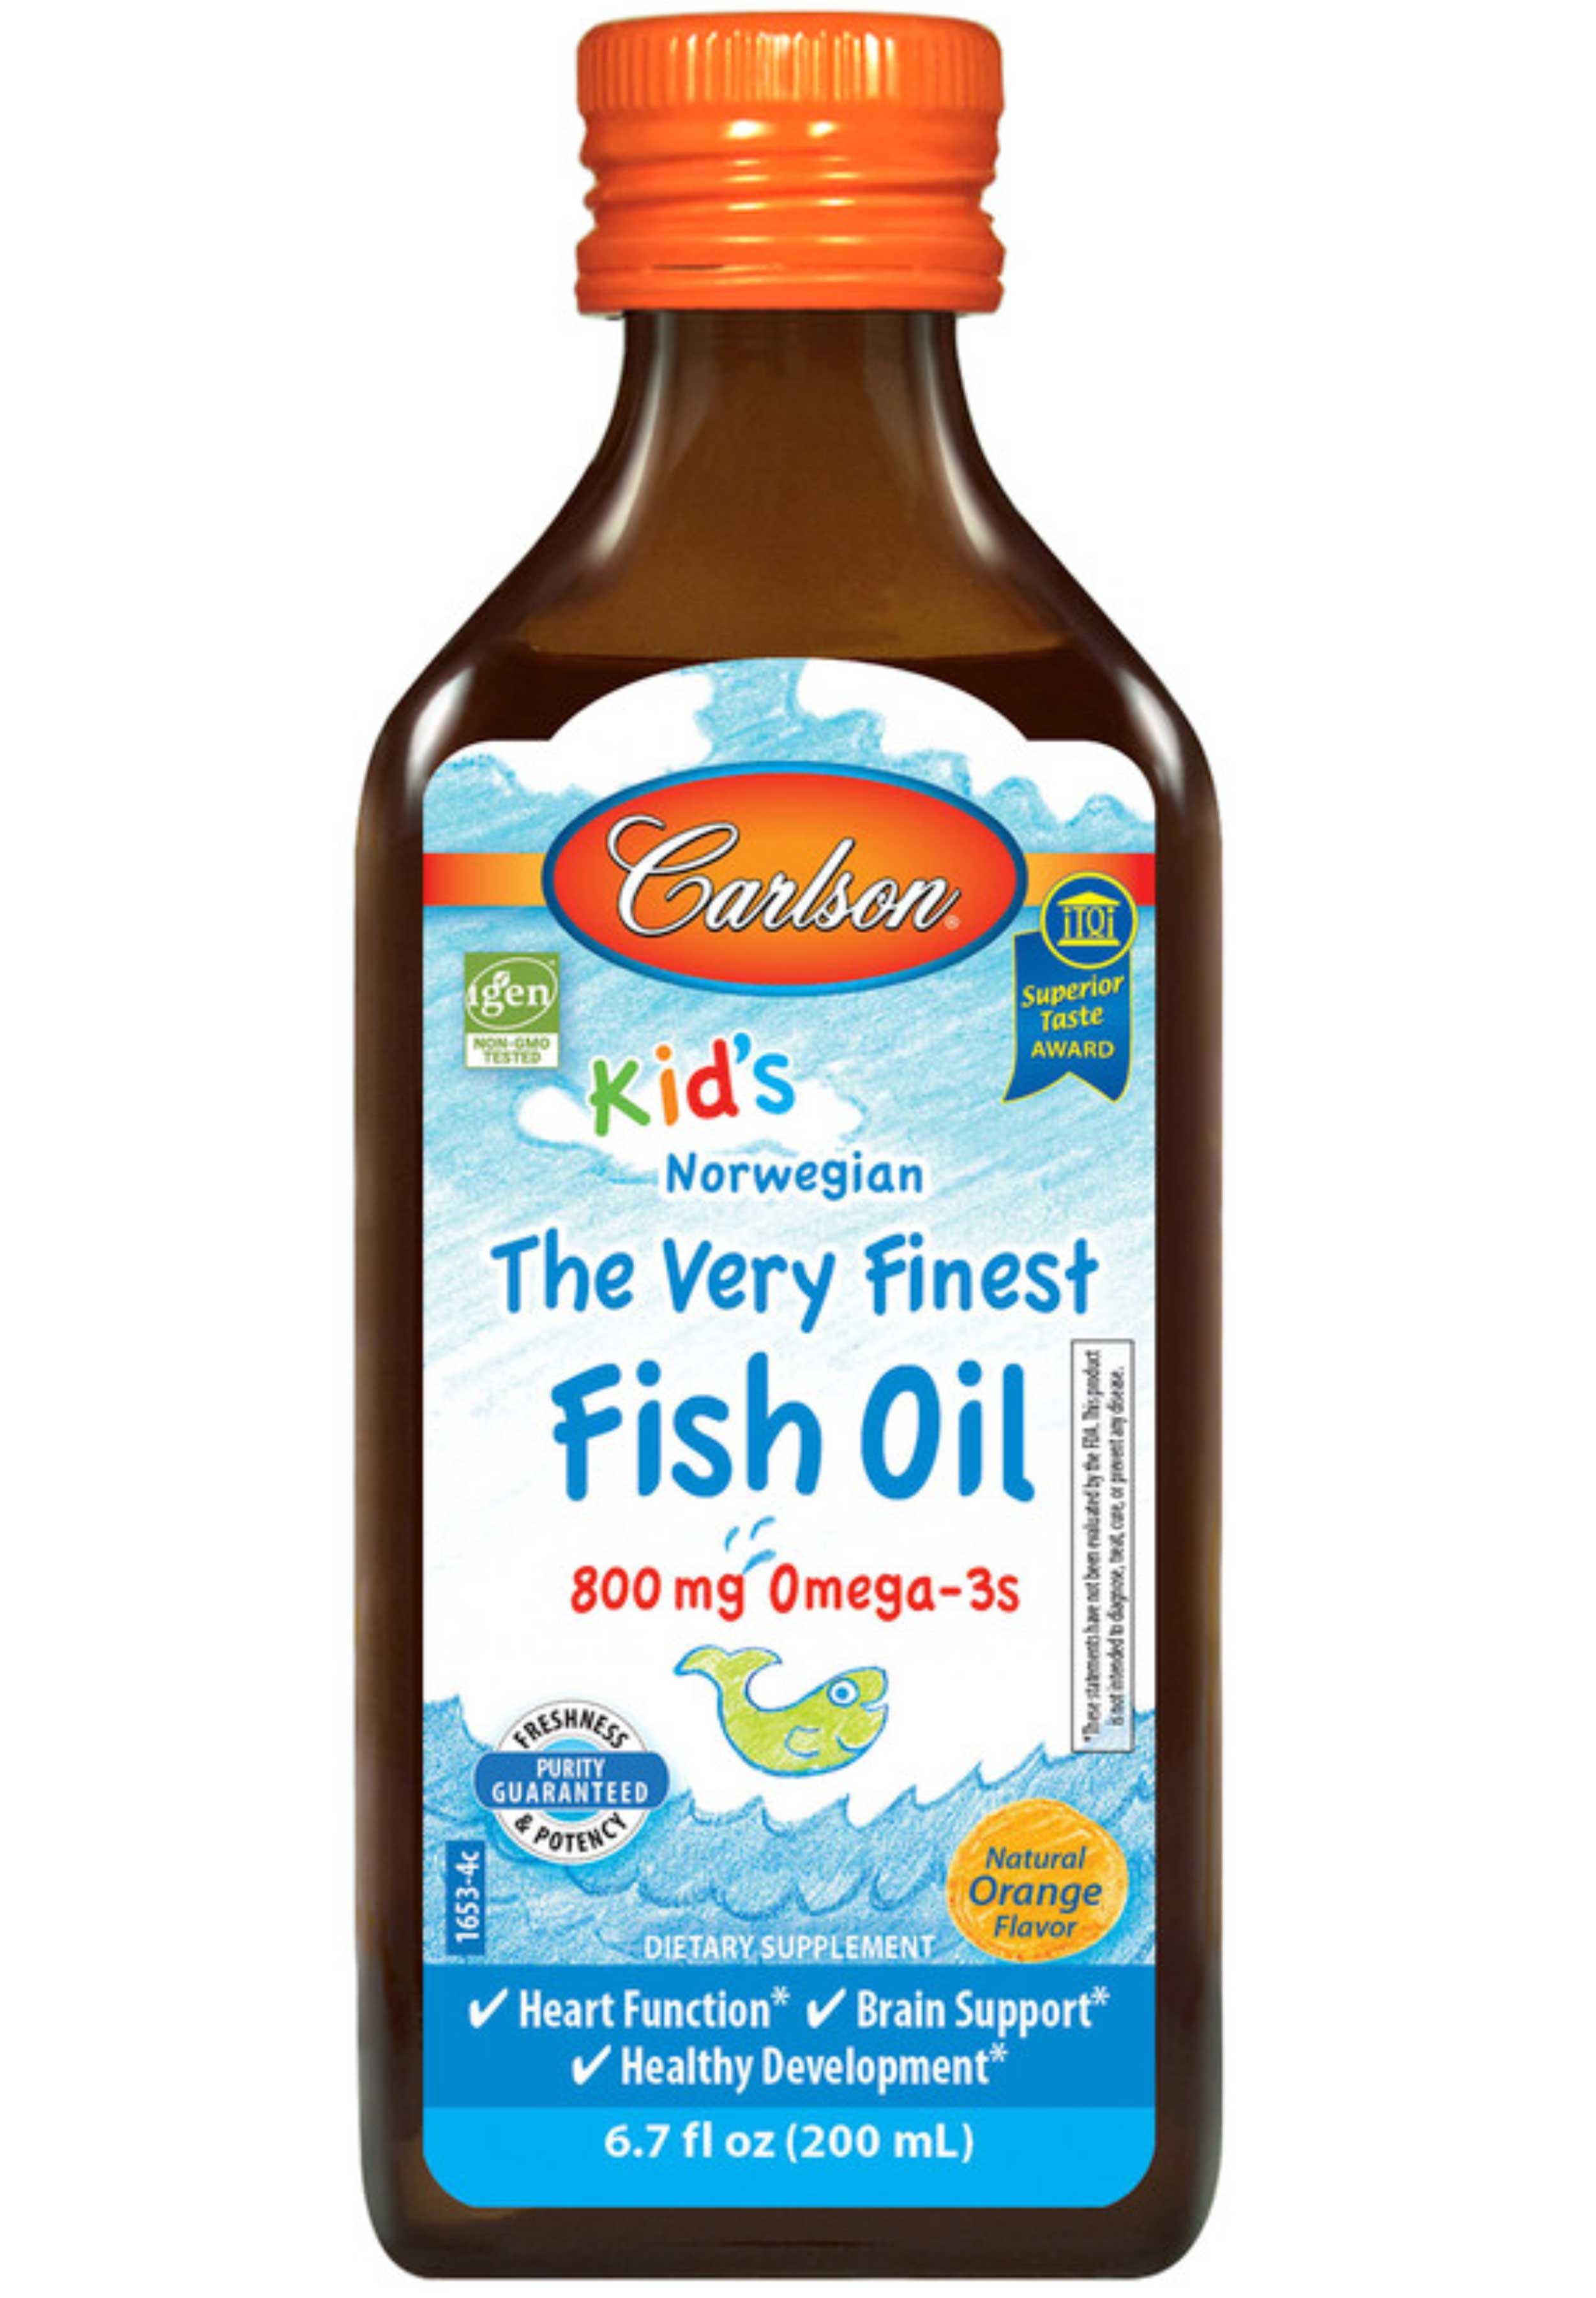 Carlson Labs Kid's Norwegian The Very Finest Fish Oil